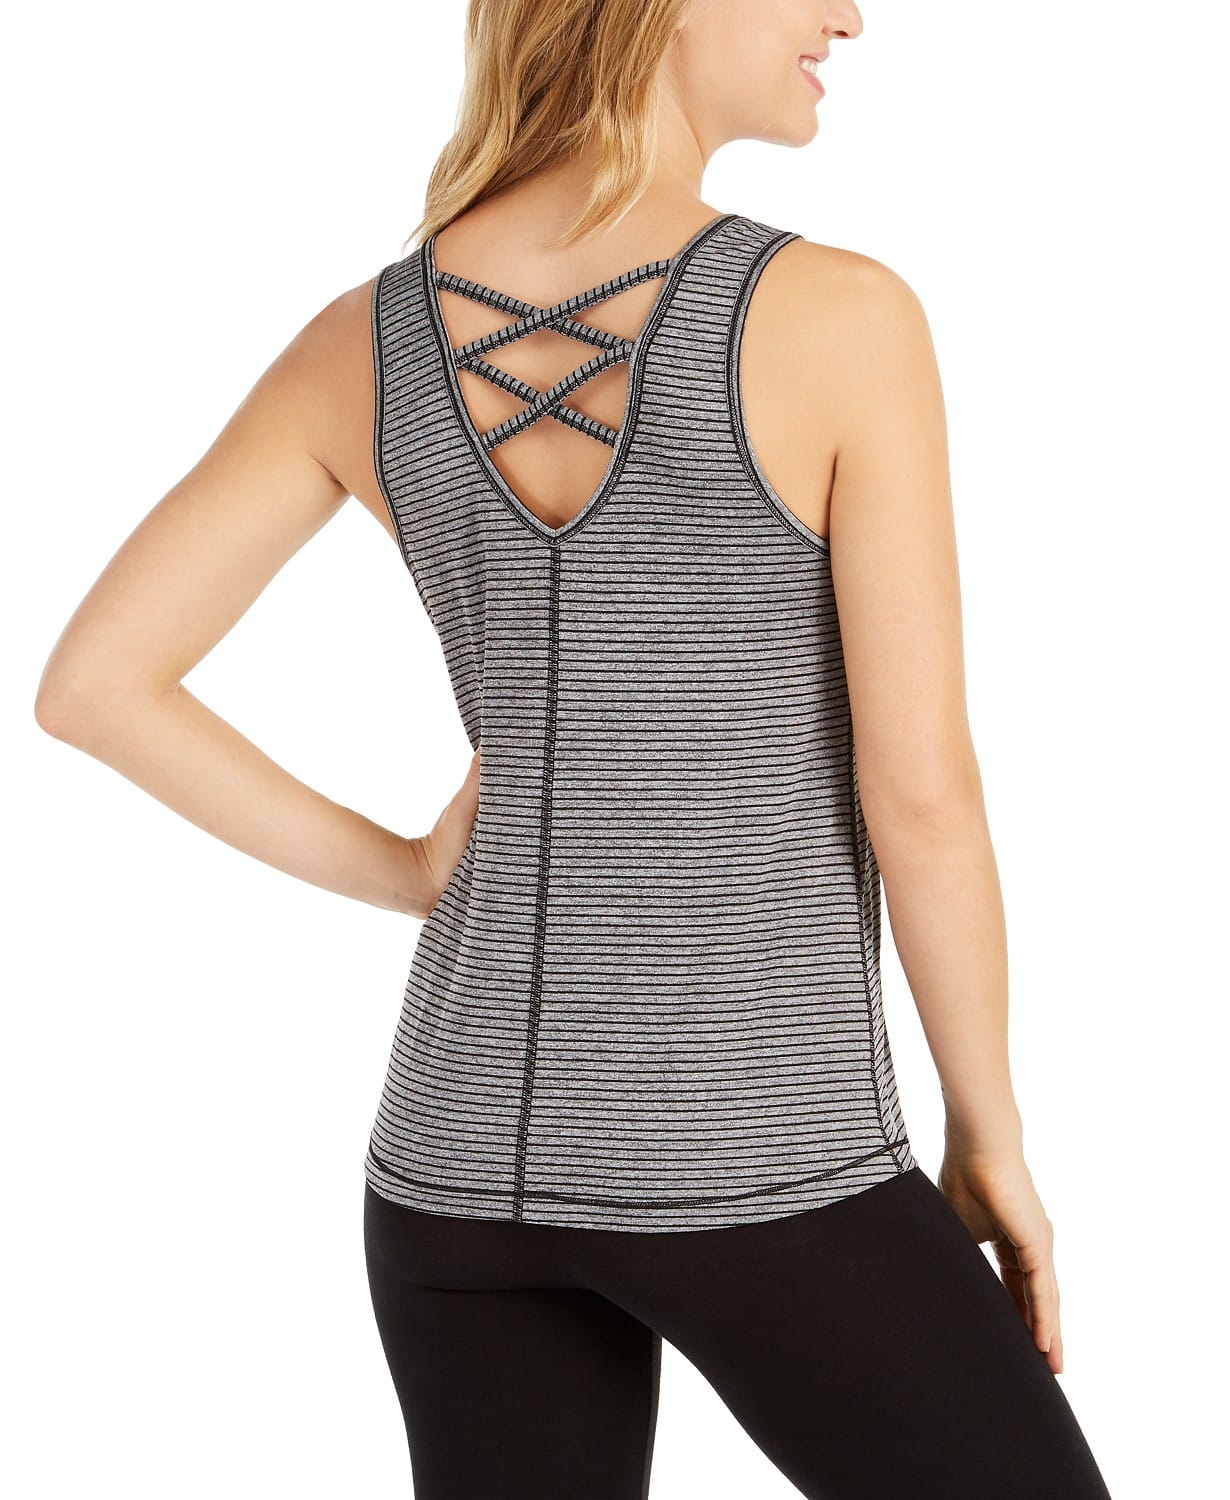 woocommerce-673321-2209615.cloudwaysapps.com-ideology-womens-grey-strappy-back-yoga-tank-top